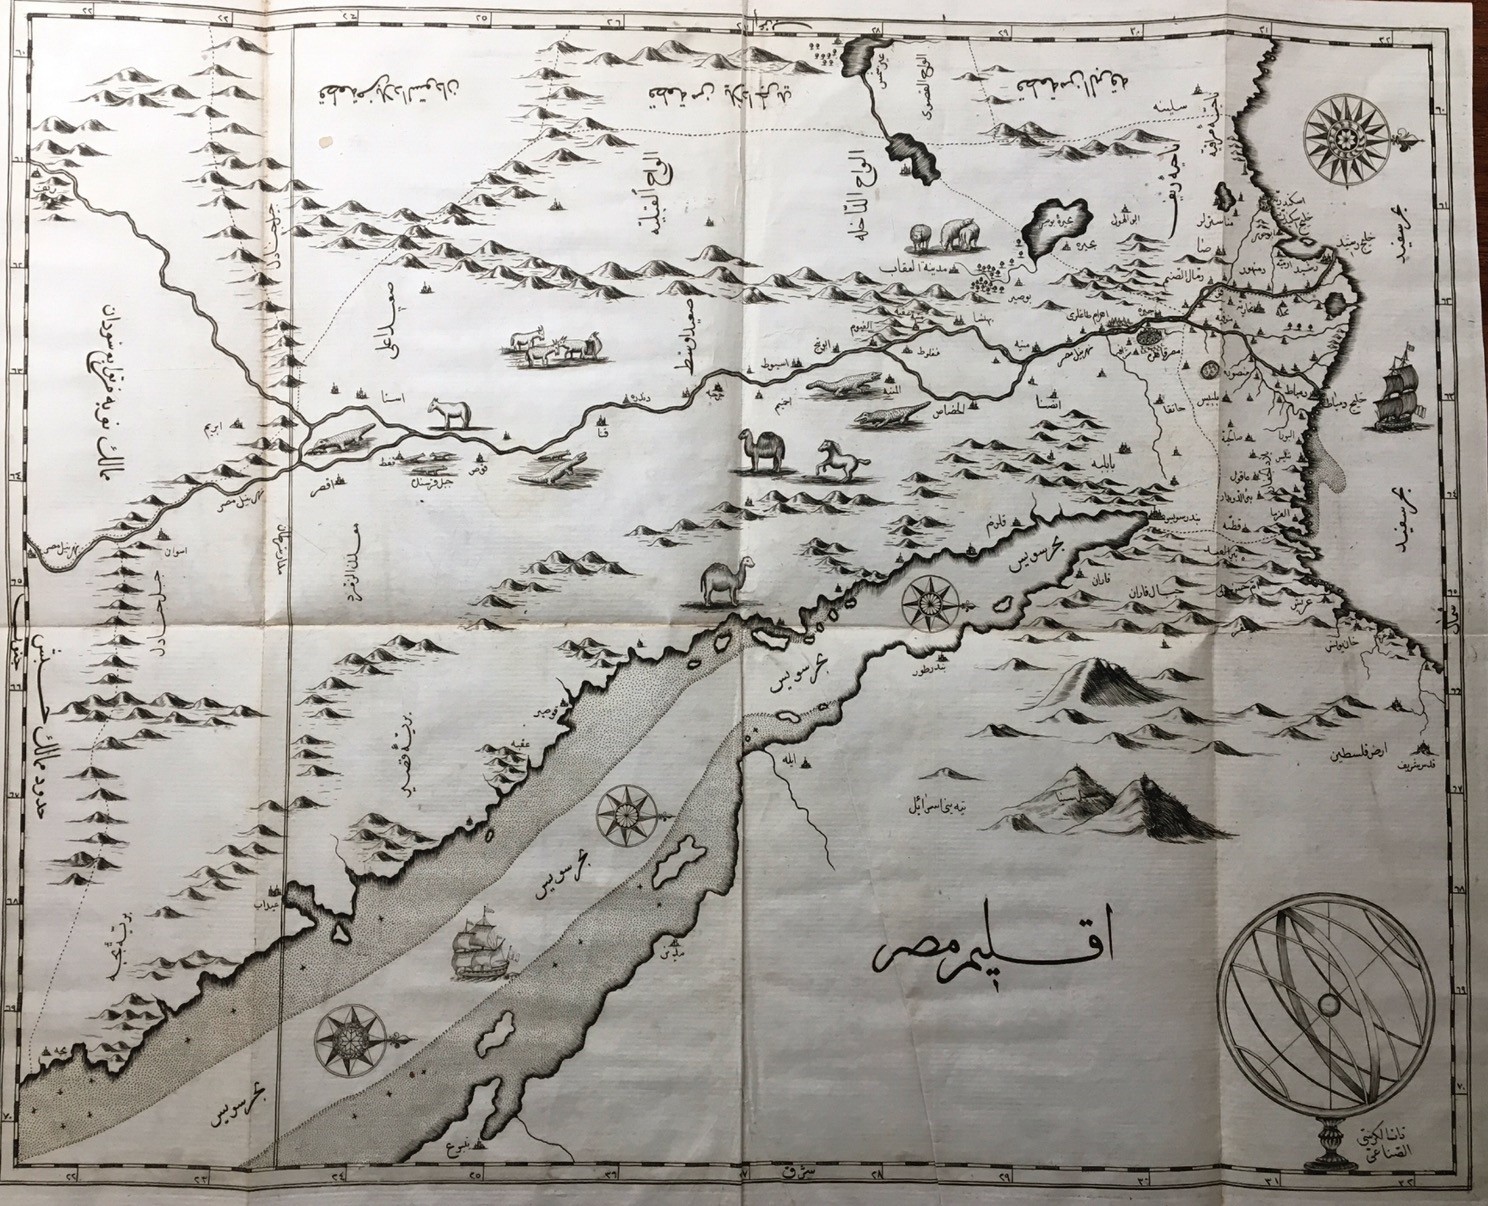 The landscapes of ancient Egypt are mapped and chronicled inside a rare Bodleian copy of a Mu00fcteferrika book by Ahmed bin Hemdem Suheyli first published in 1730, among the first ever printed by an Ottoman Muslim. 